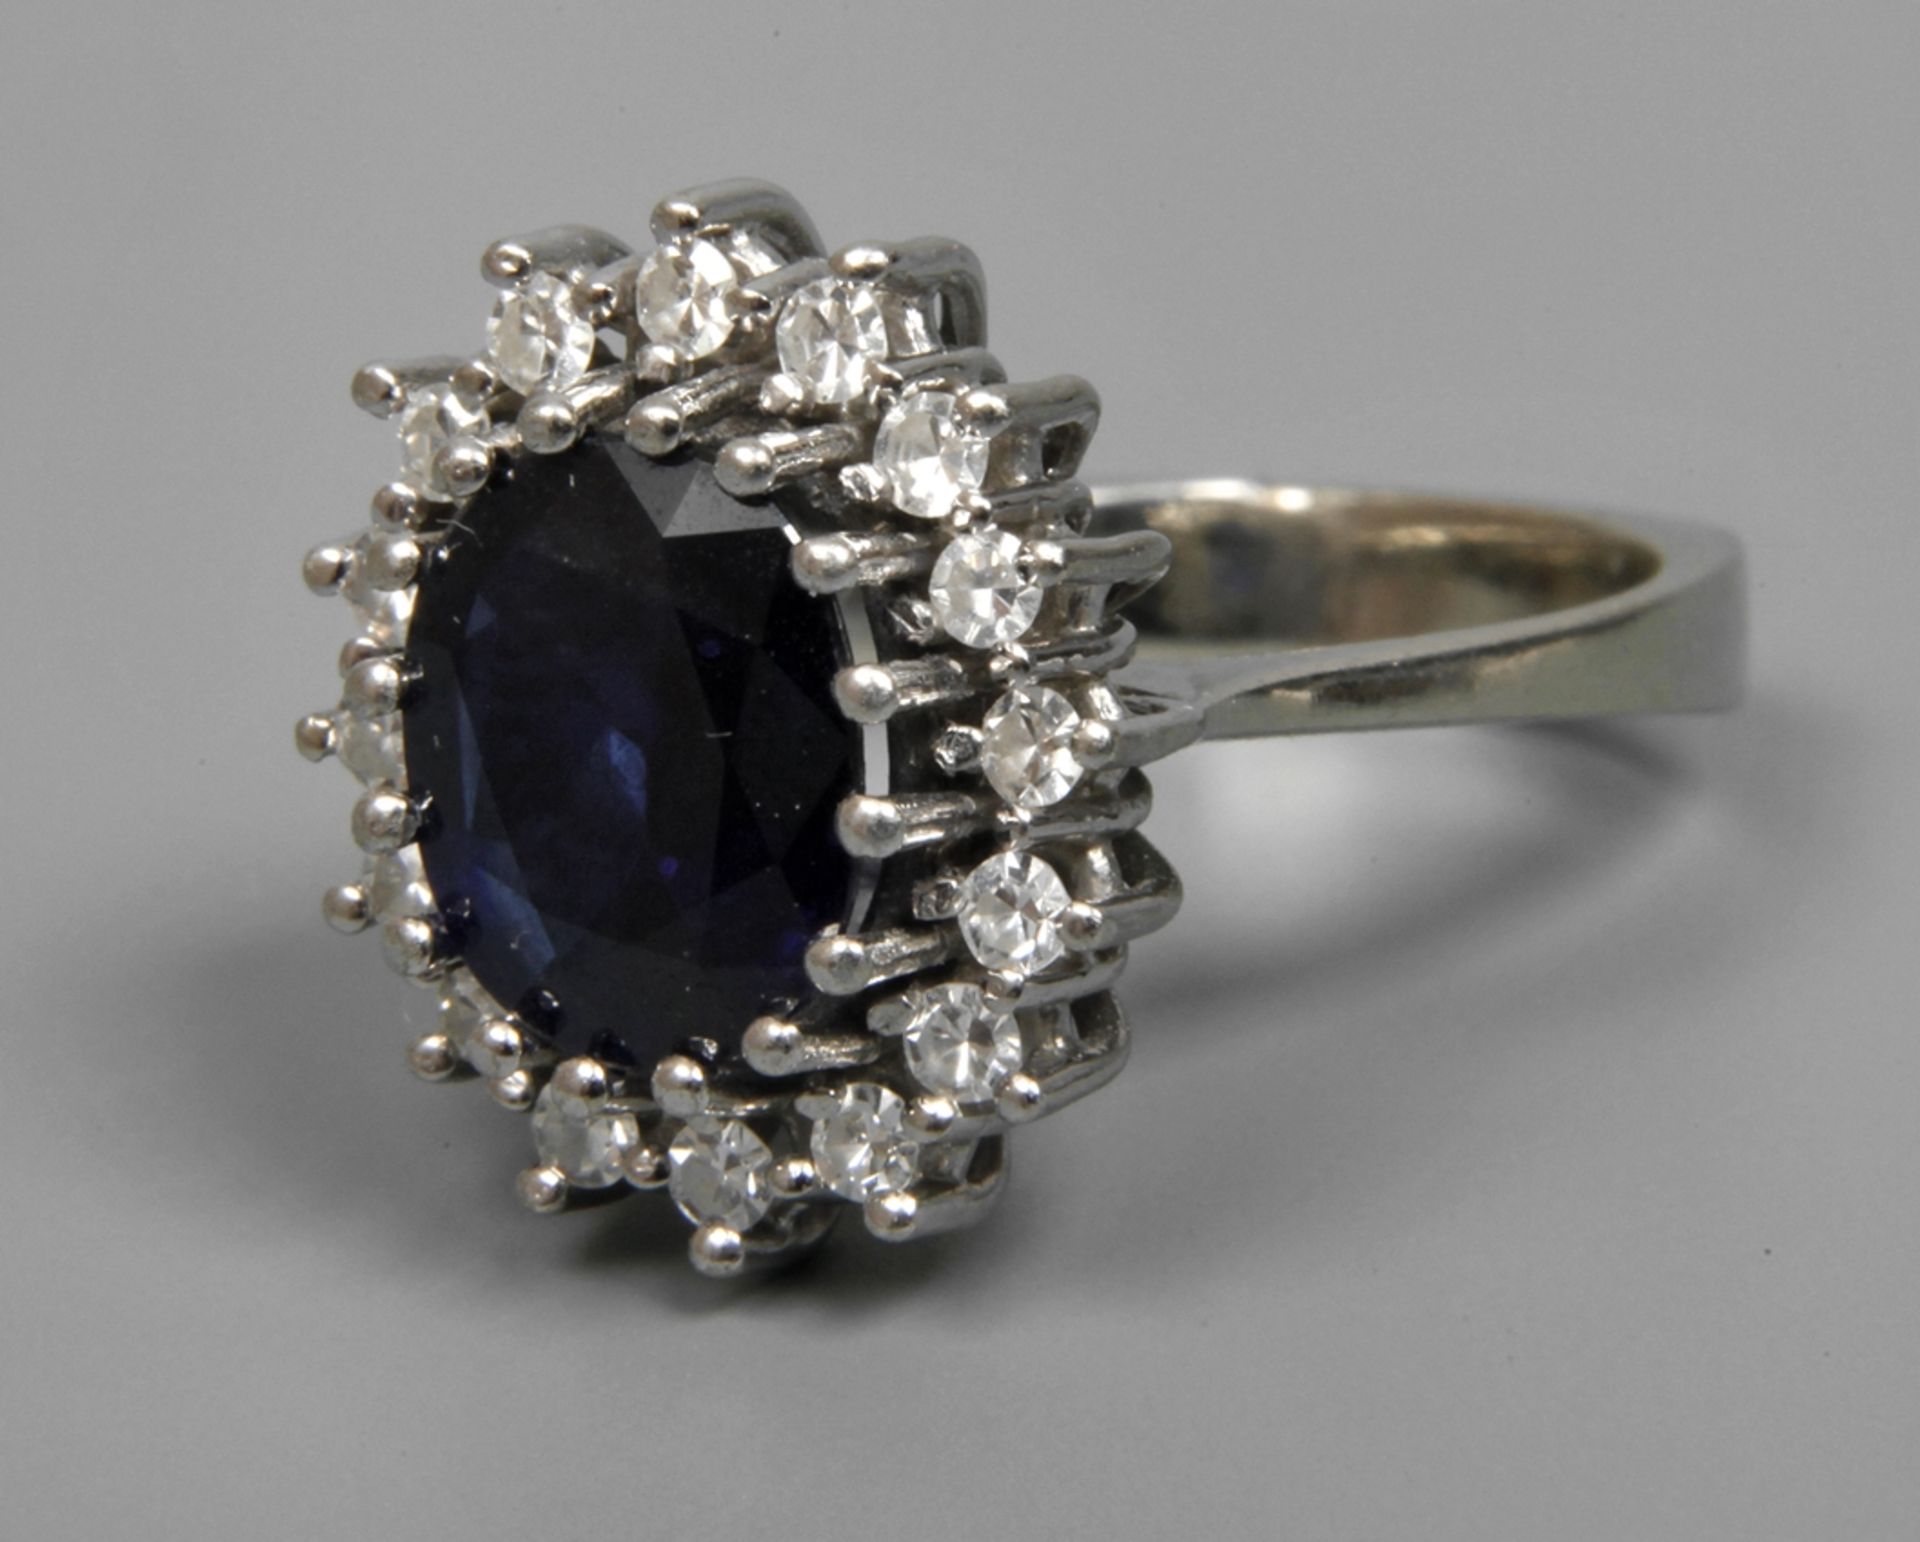 Lady's ring with sapphire and diamonds